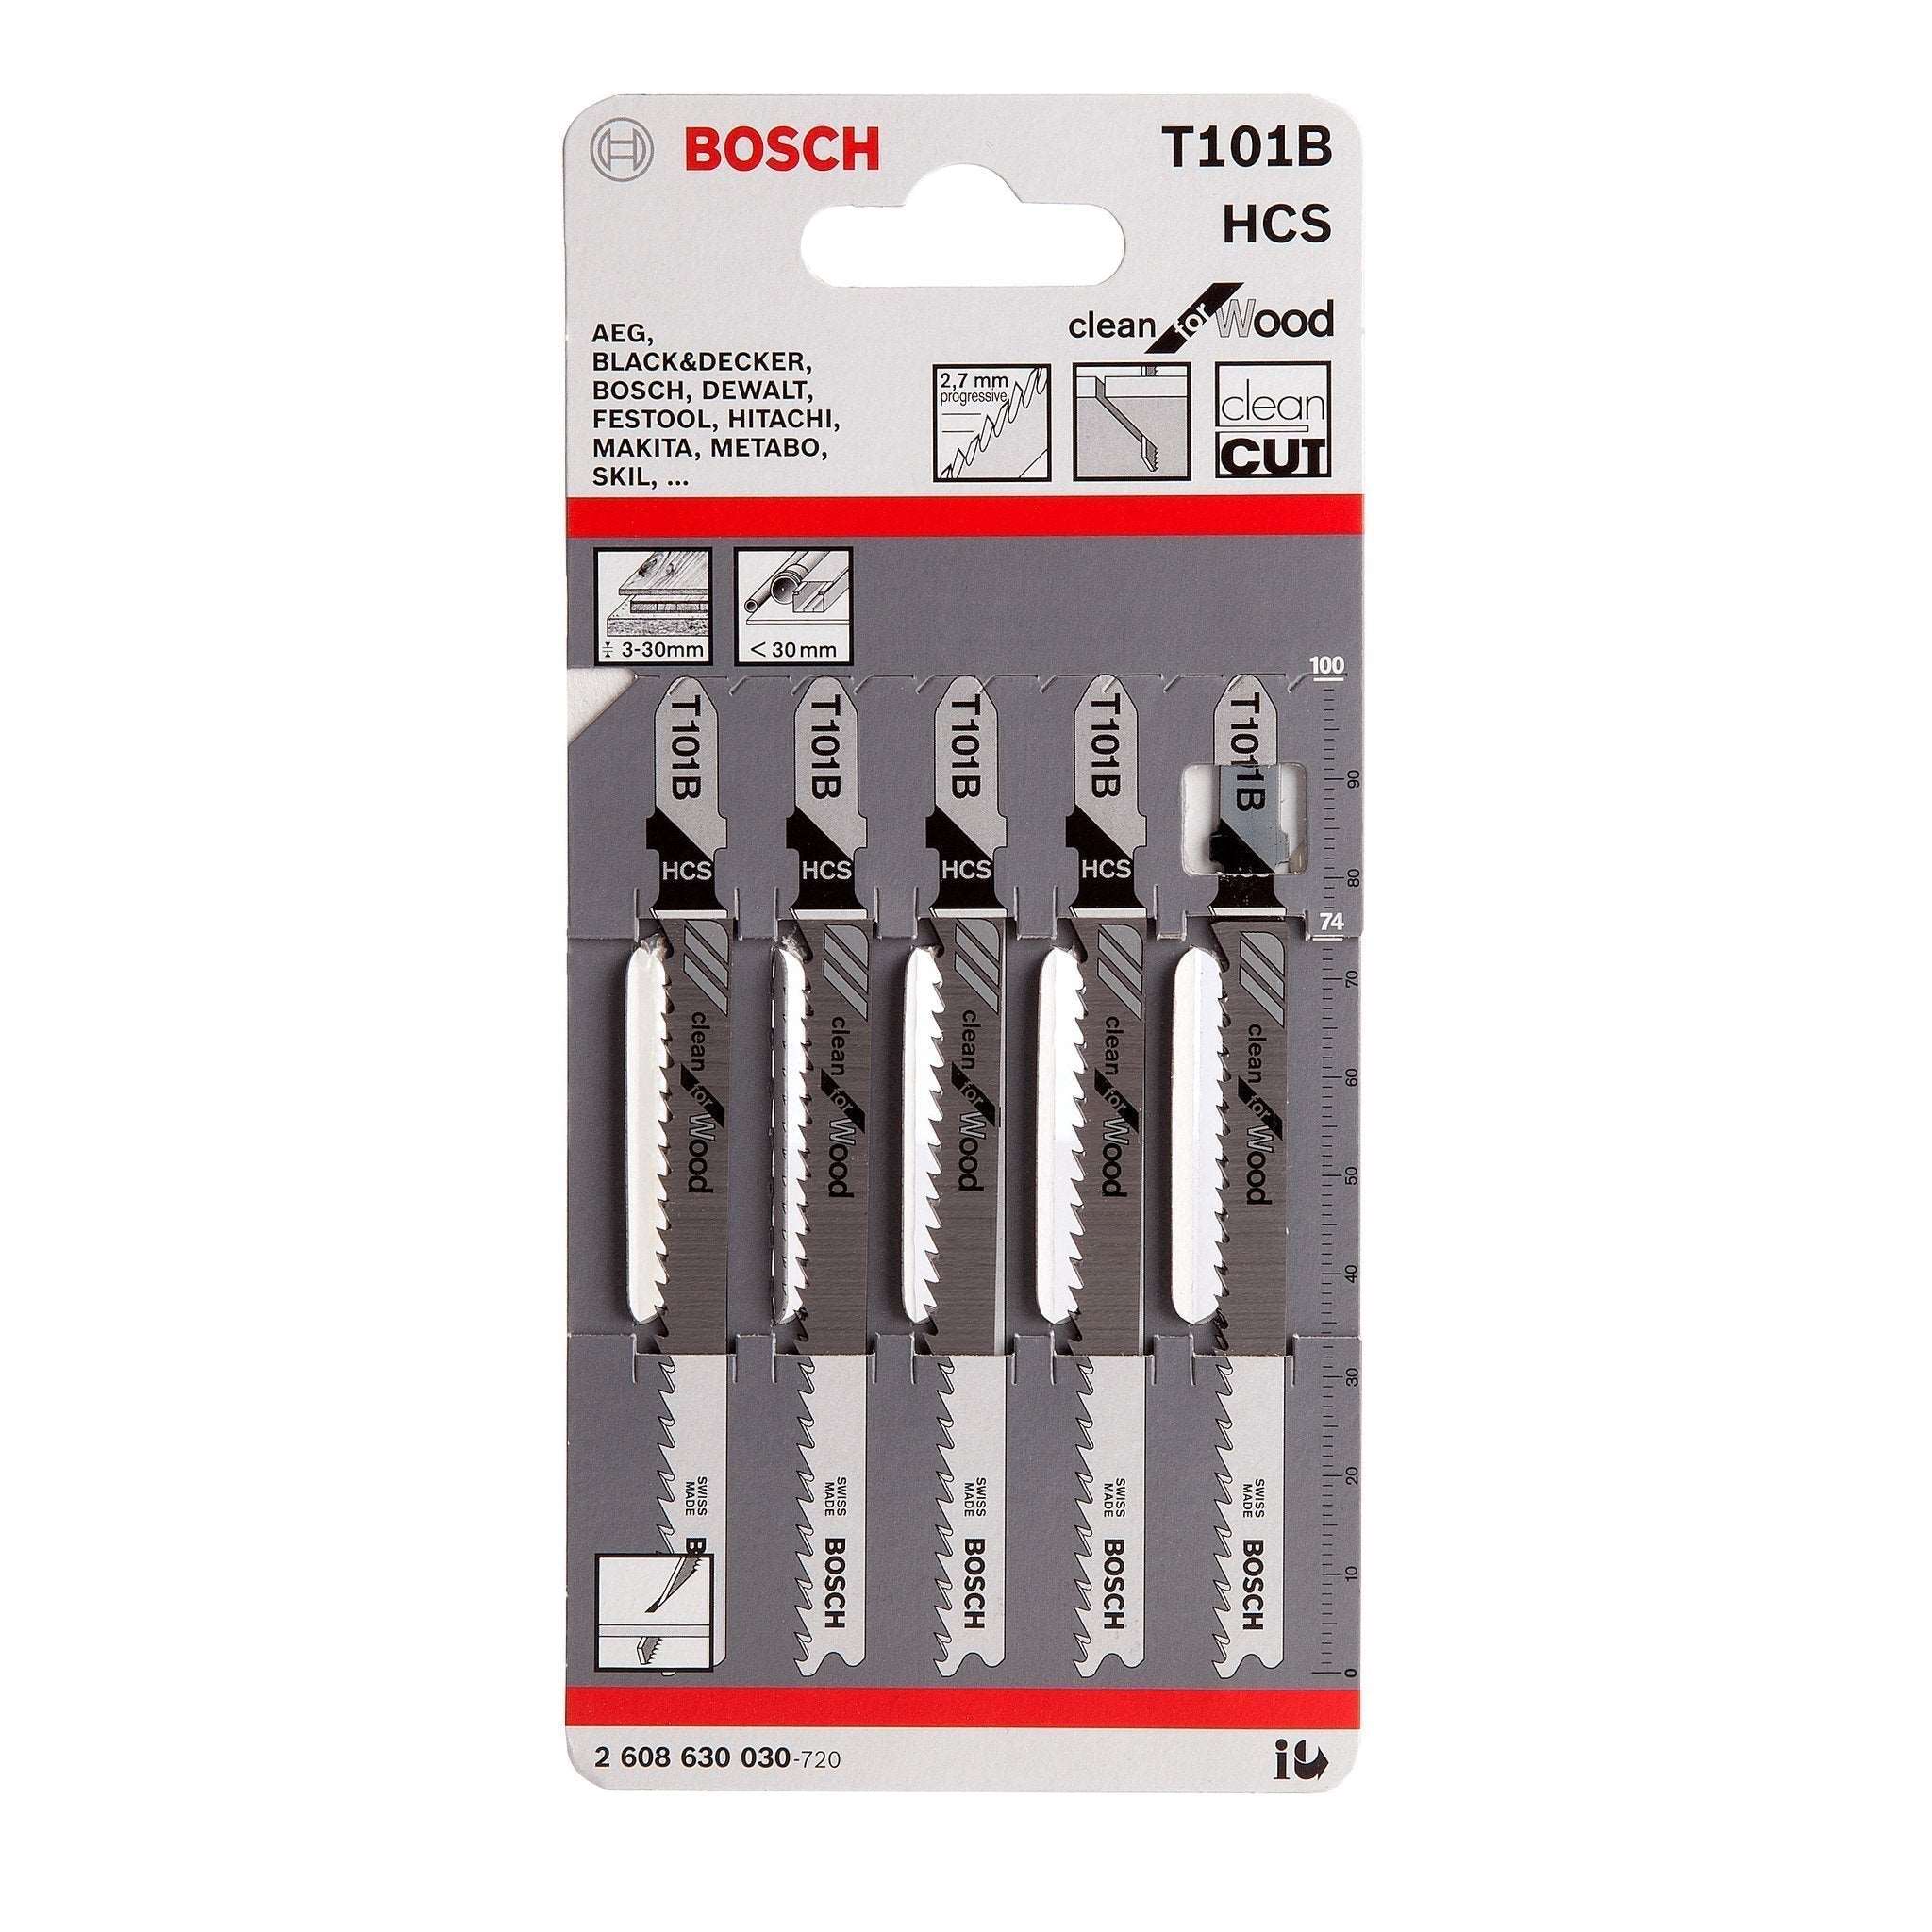 Bosch Jigsaw Blades T101B Clean for Wood 5 Pack 2608630030 Power Tool Services